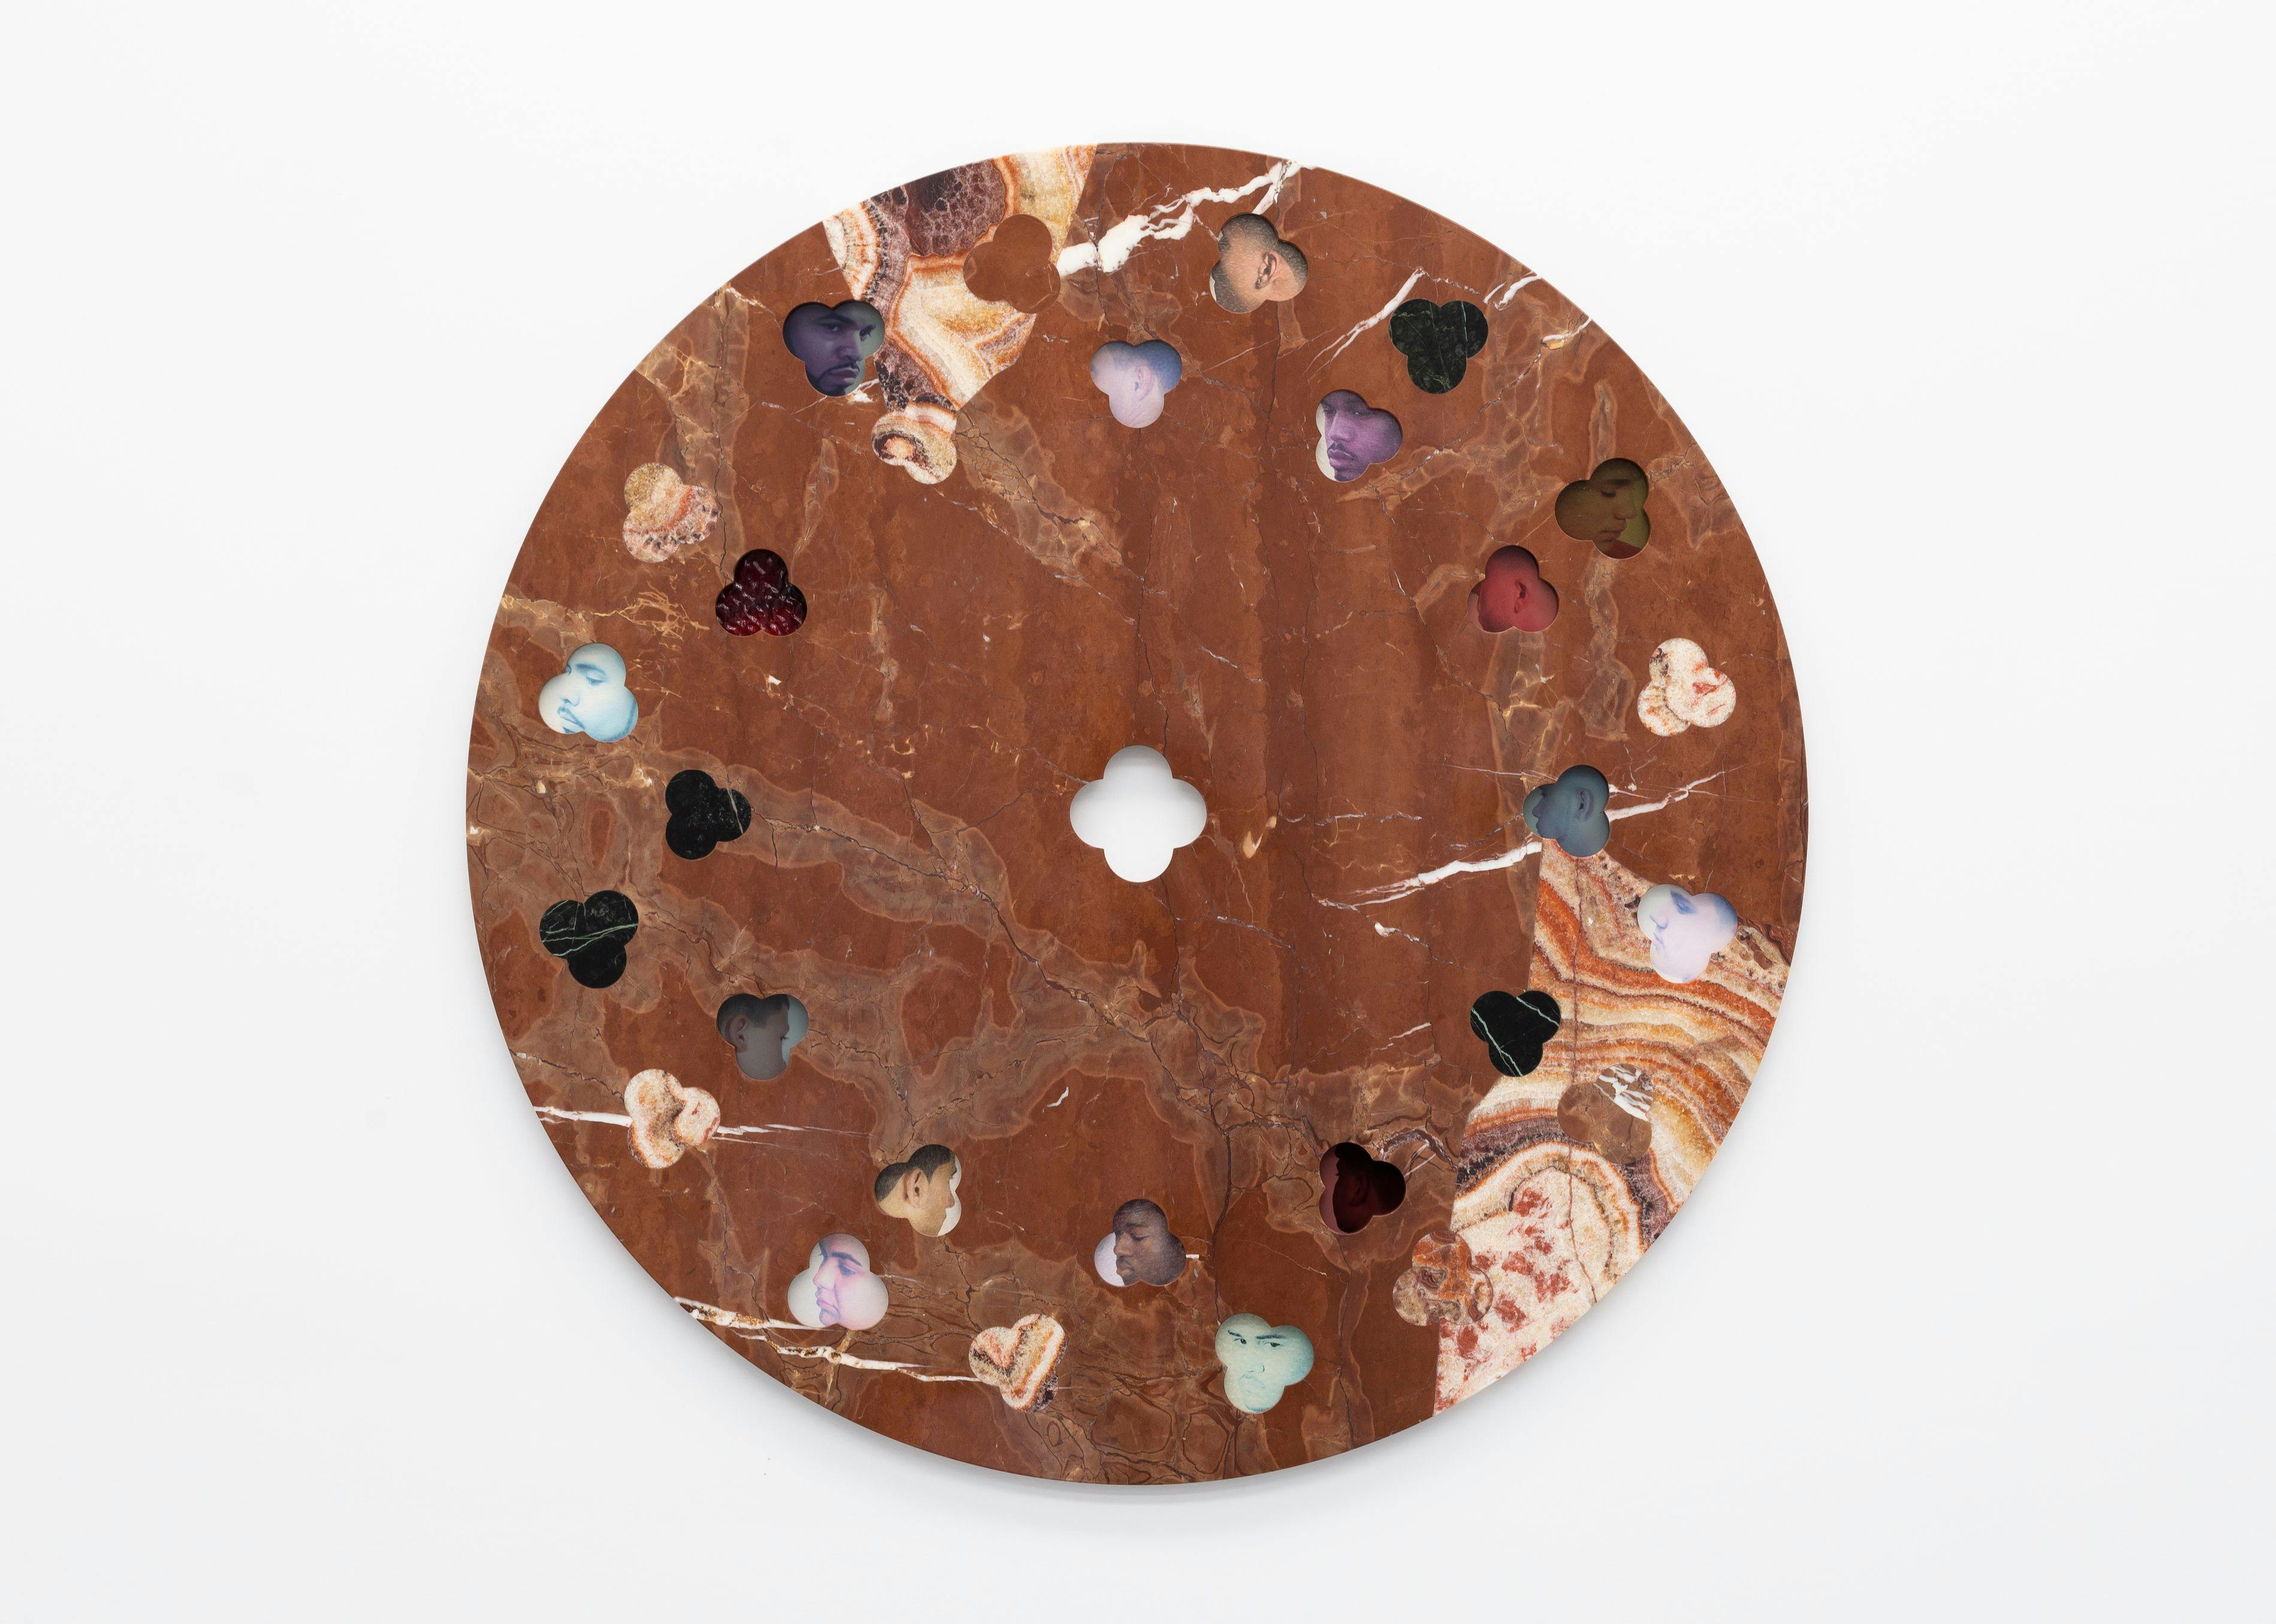 Rose Window (Rossa Alicante), 2022, Rosso Alicante marble, red onyx, Verias green marble, found barbershop posters, 36 in diameter, Photographer: Jesse Boles